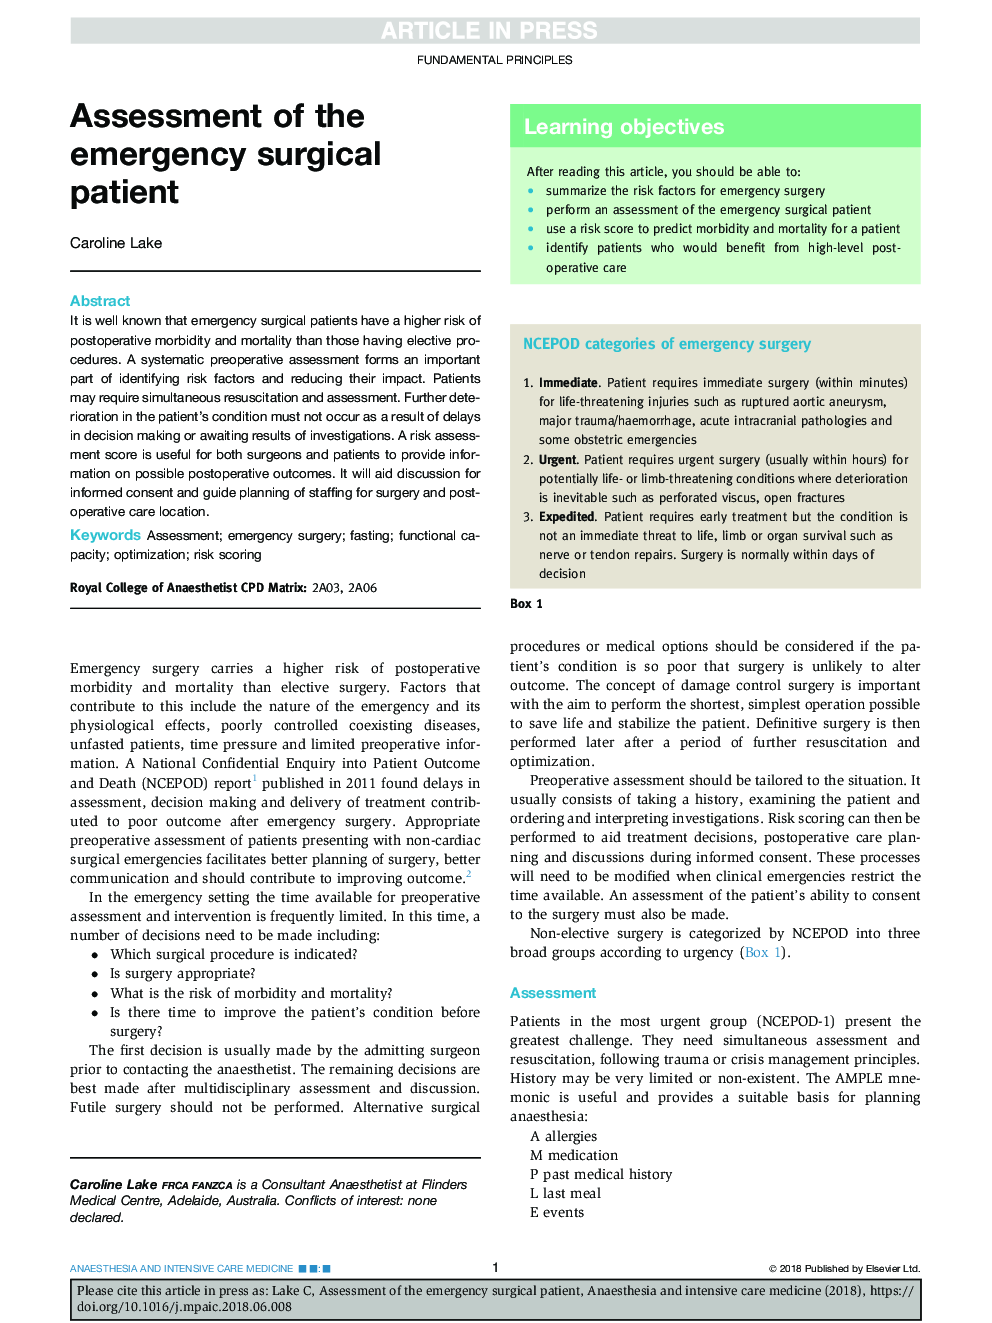 Assessment of the emergency surgical patient